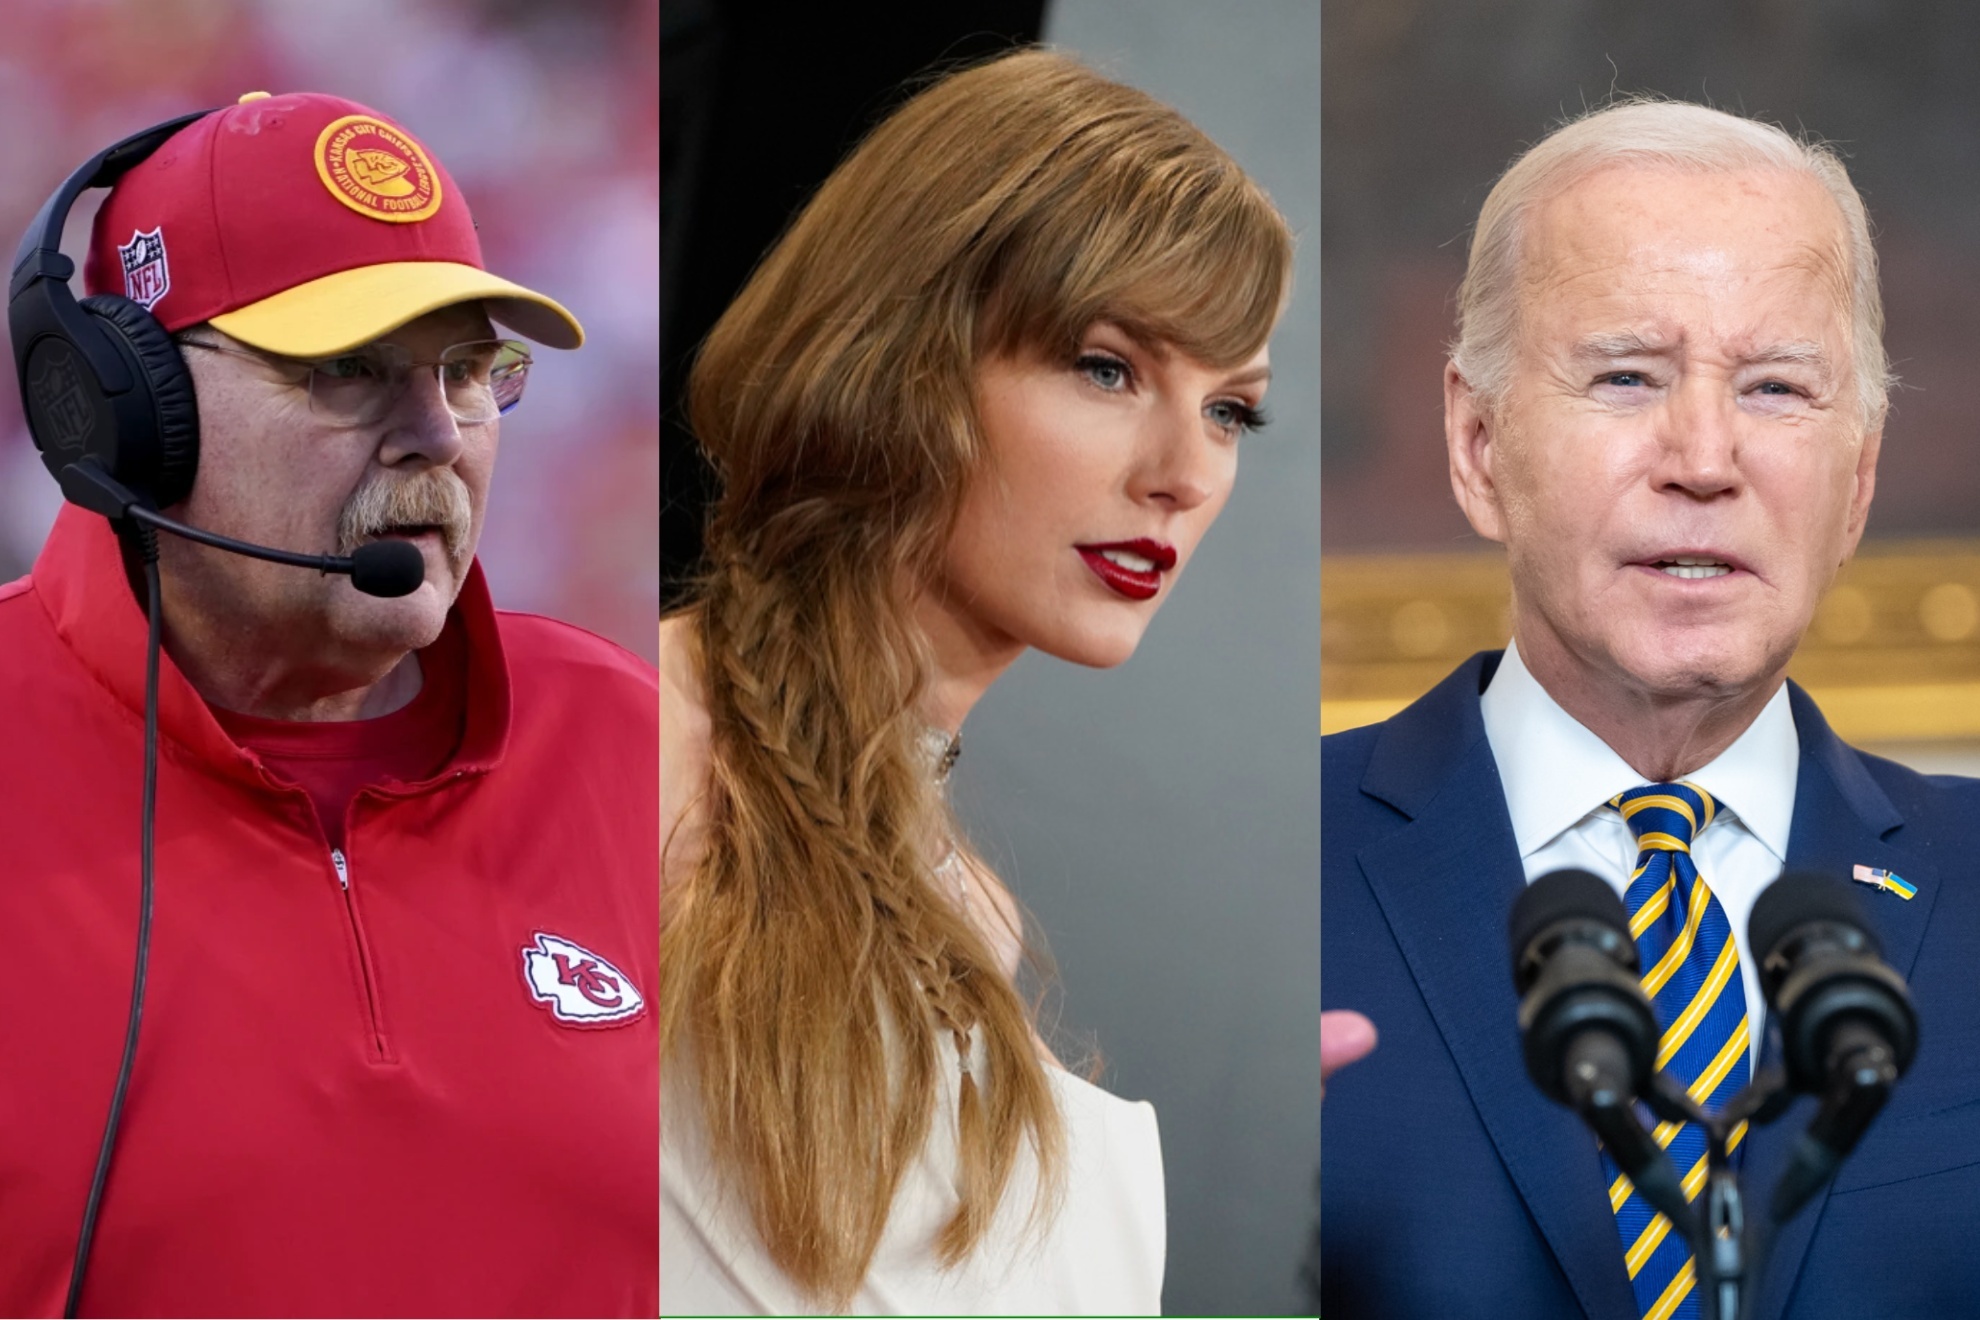 Andy Reid spoke out about the conspiracy theories surrounding Taylor Swifts and Joe Biden